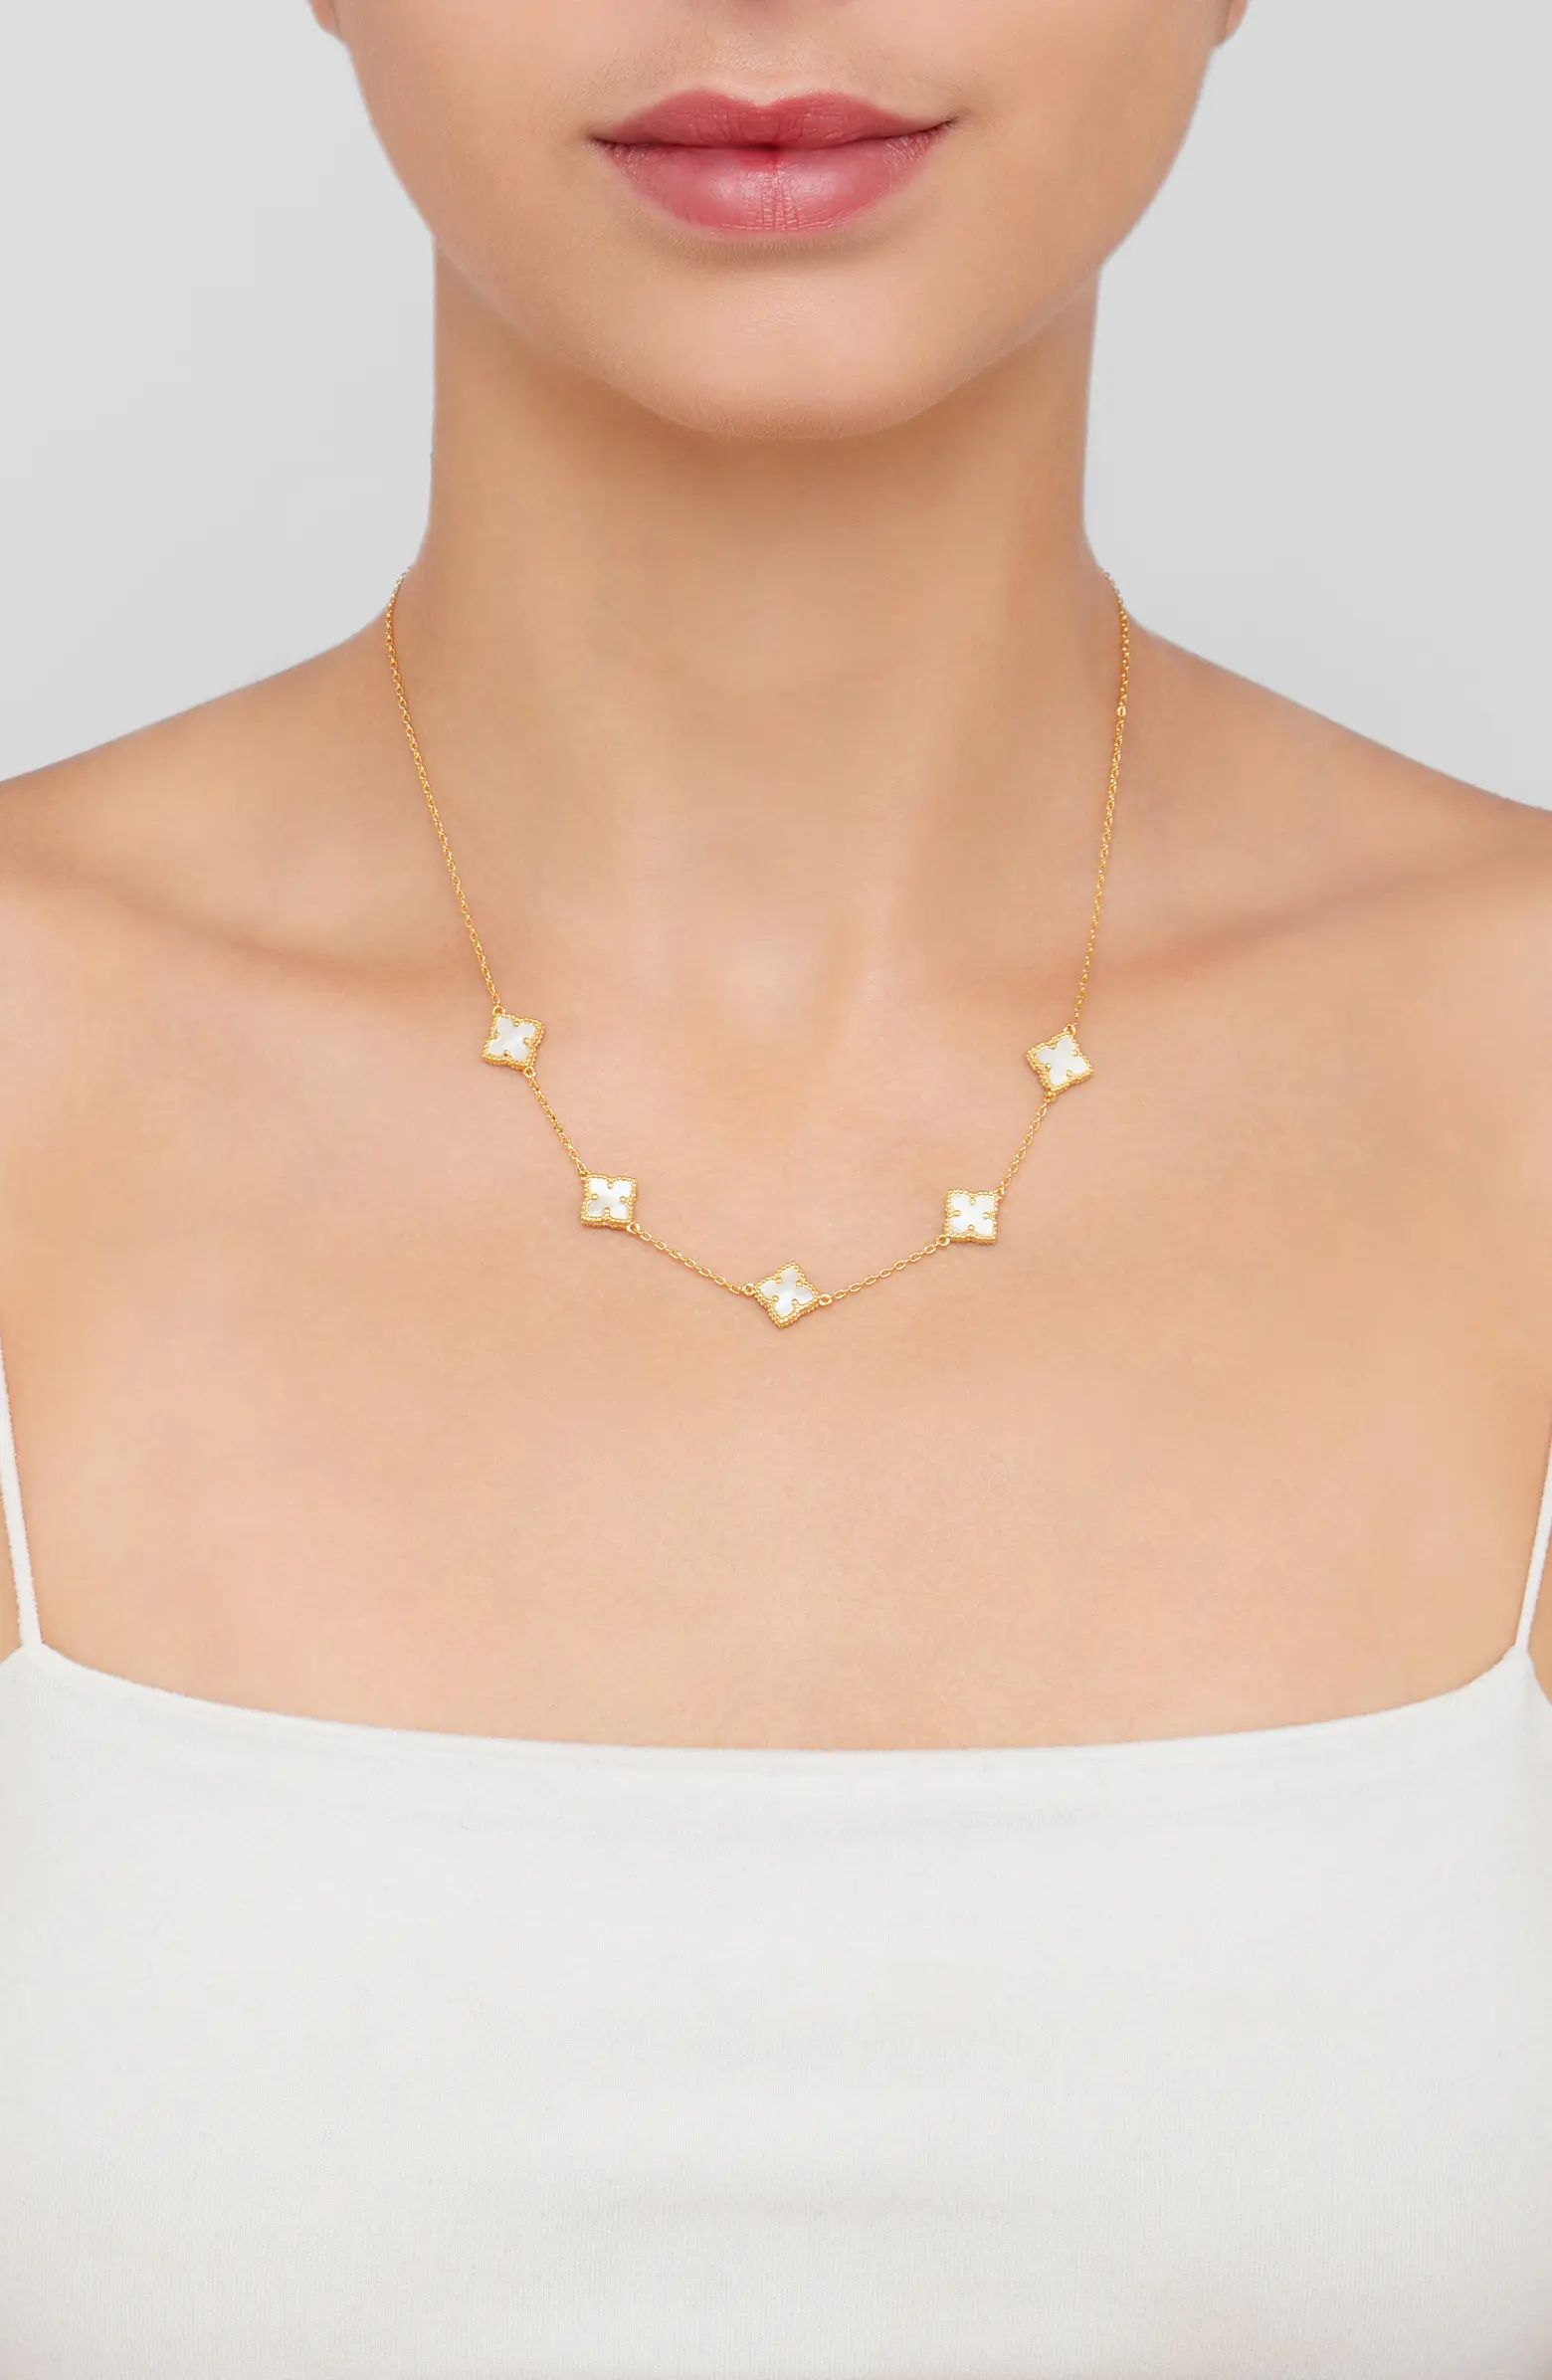 White Mother of Pearl Station Chain Necklace | Nordstrom Rack